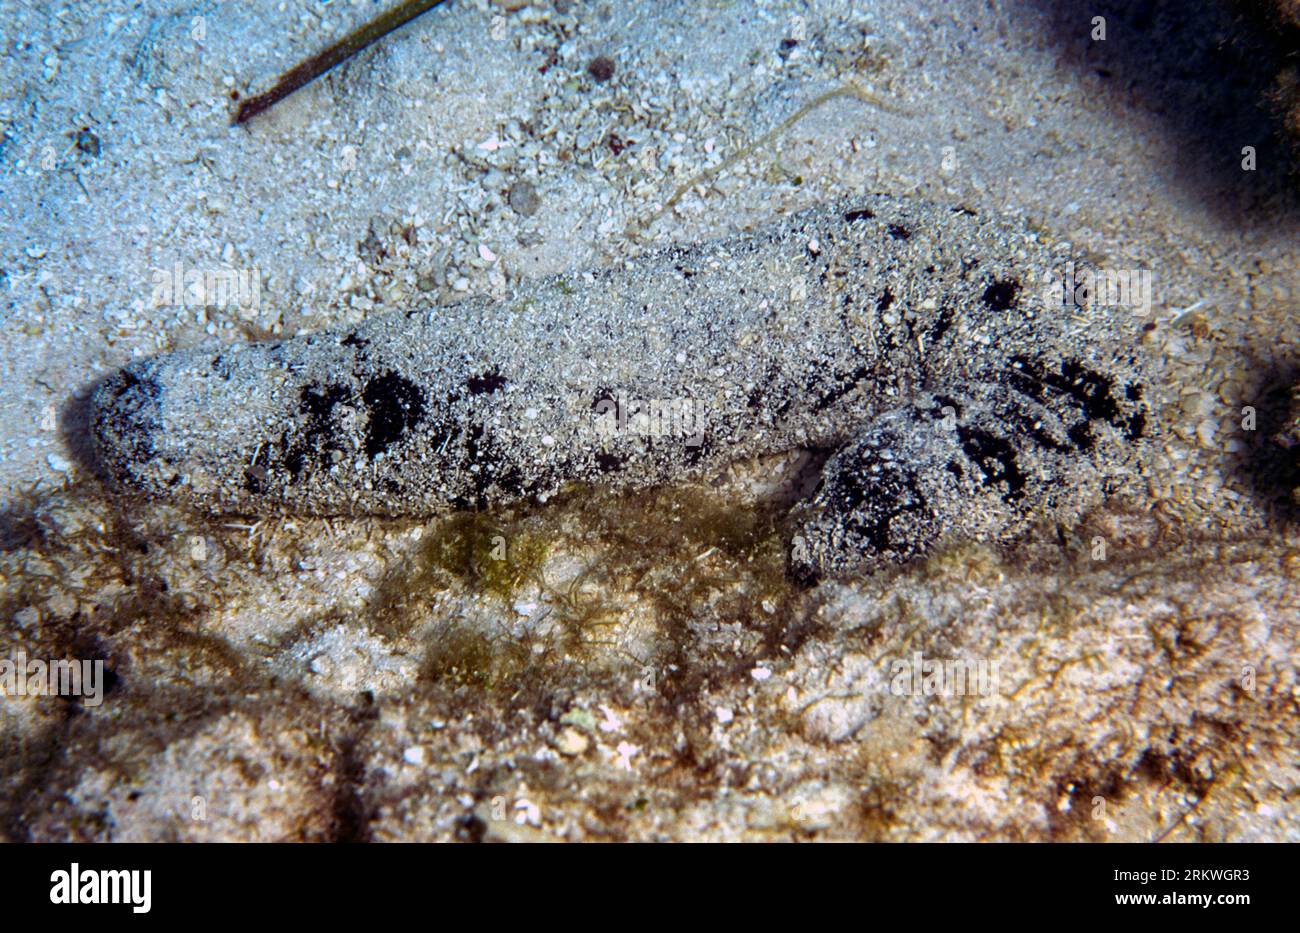 Black sea cucumber (Holothuria atra) typically covered with sand particles. Photo from Rarotonga, Cook Islands, south Pacific. Stock Photo